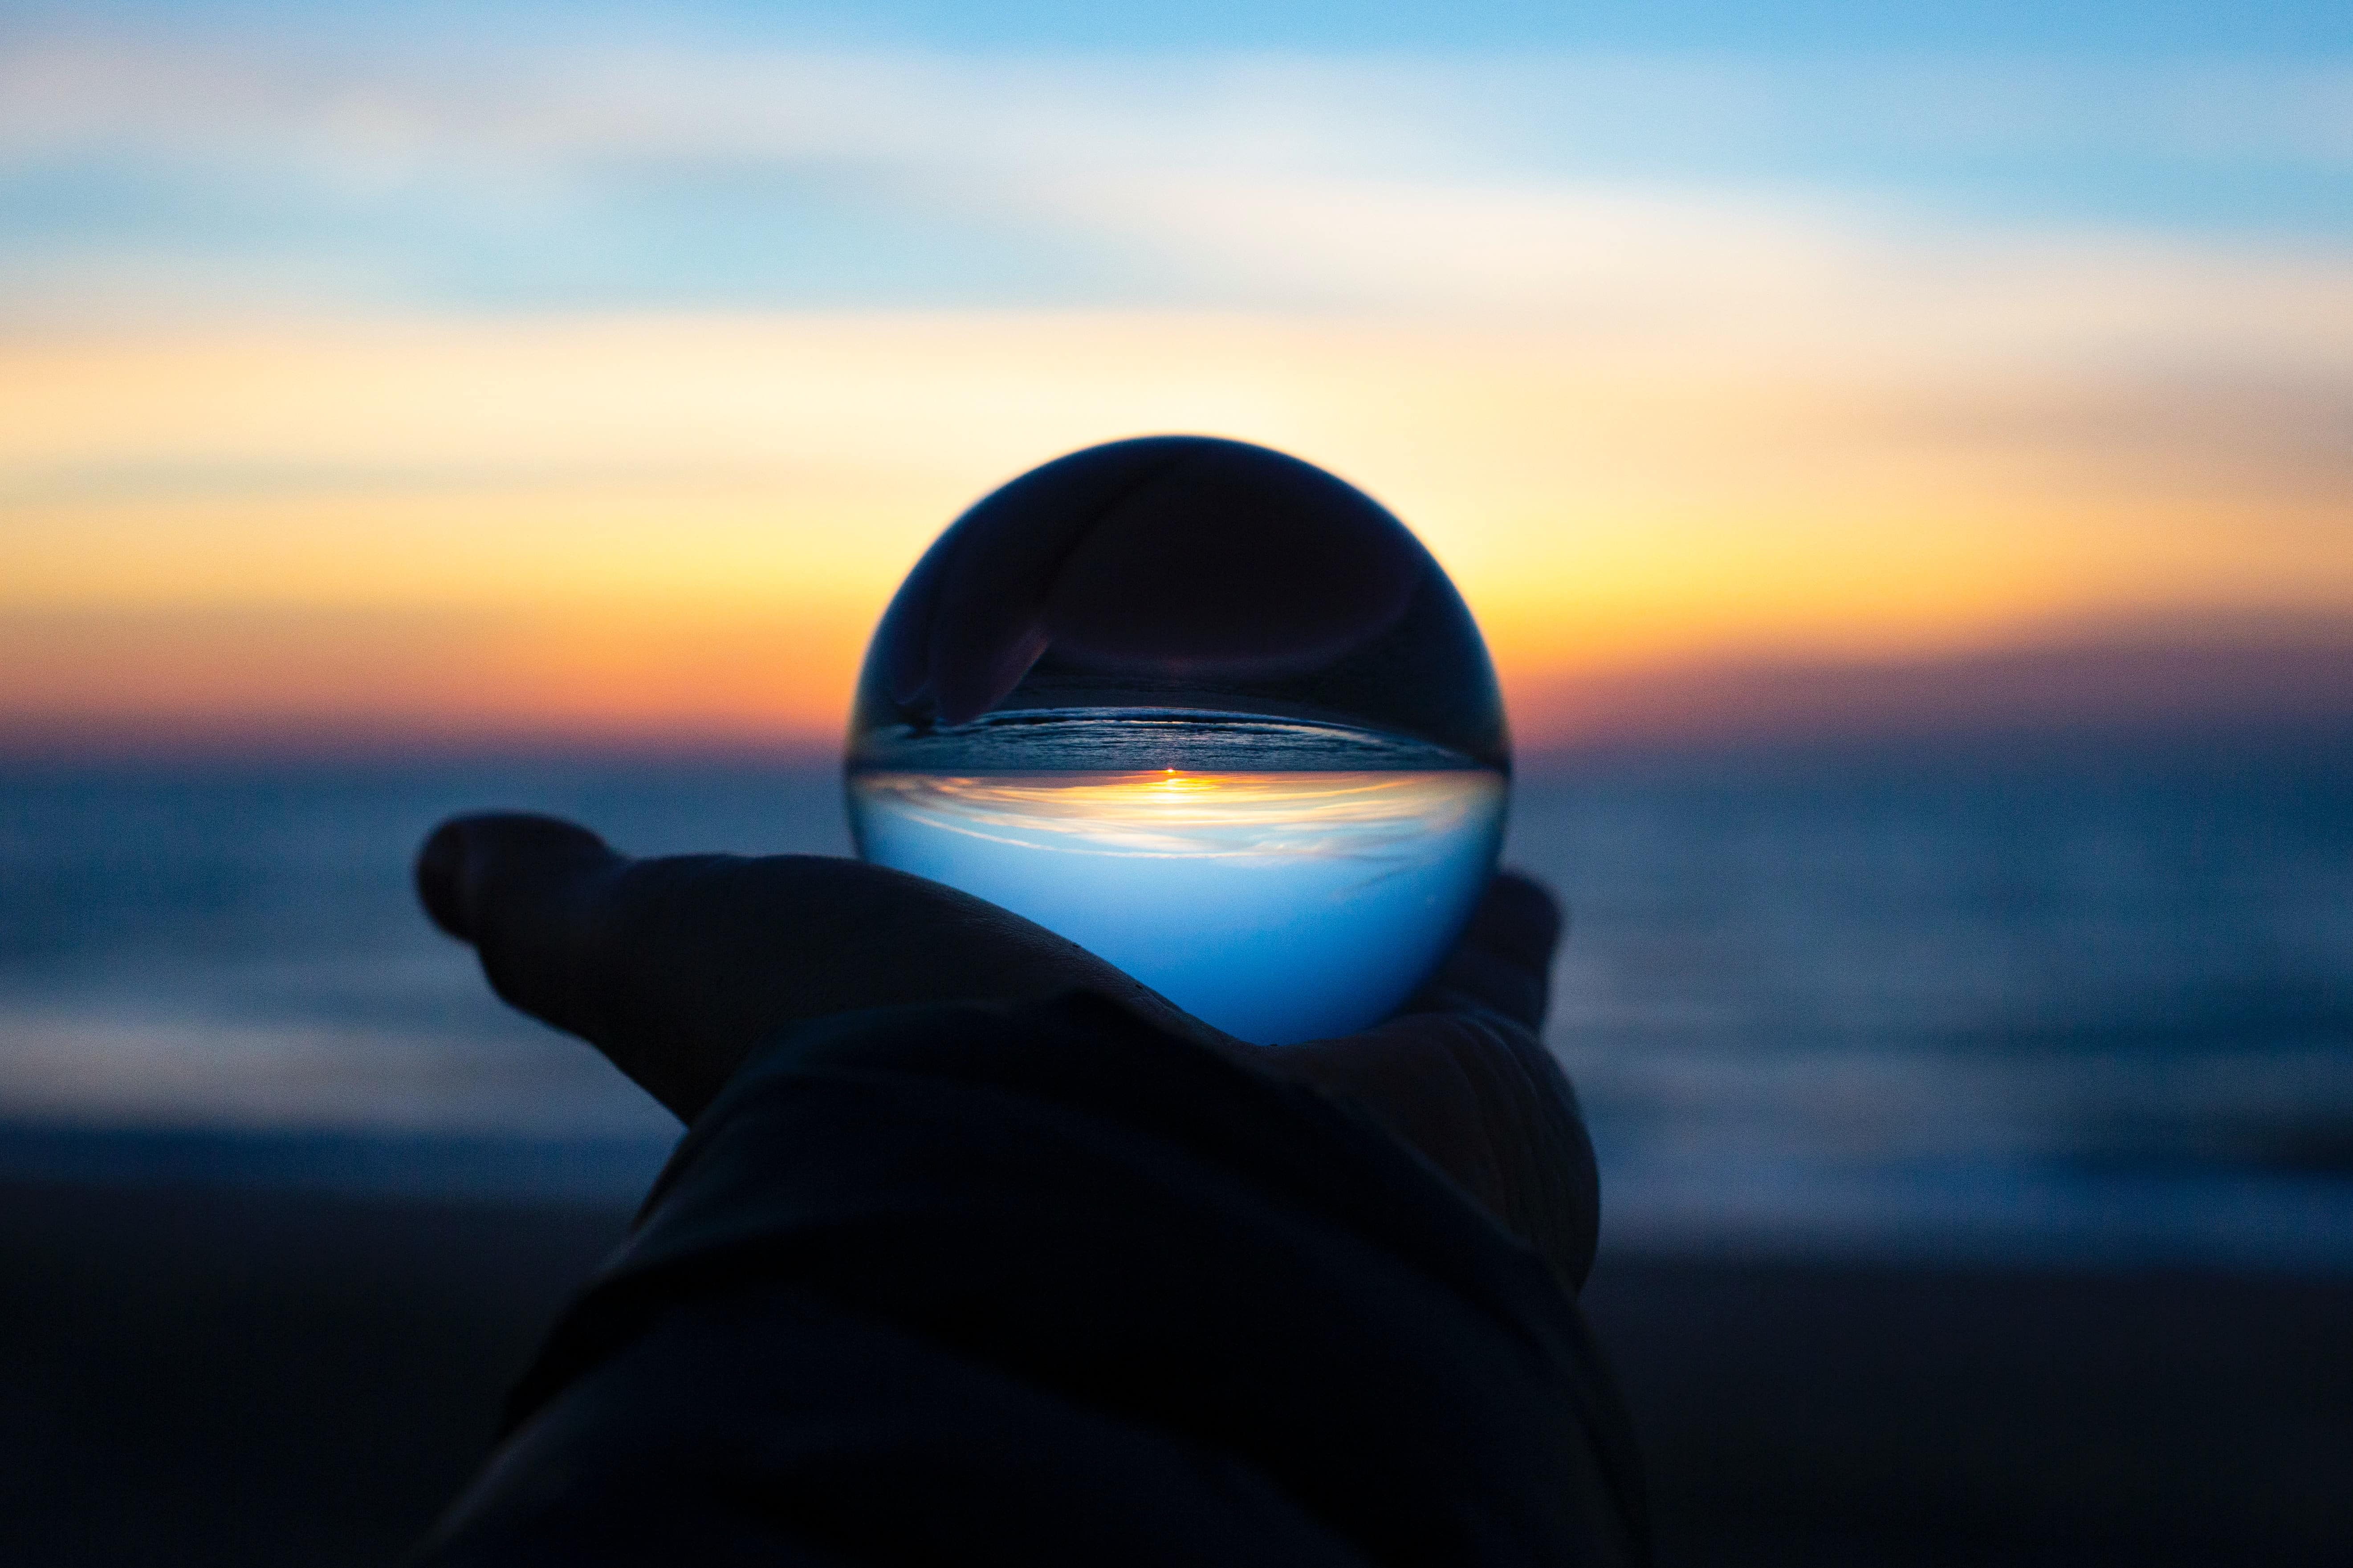 A person holds a crystal ball up in front of the sea